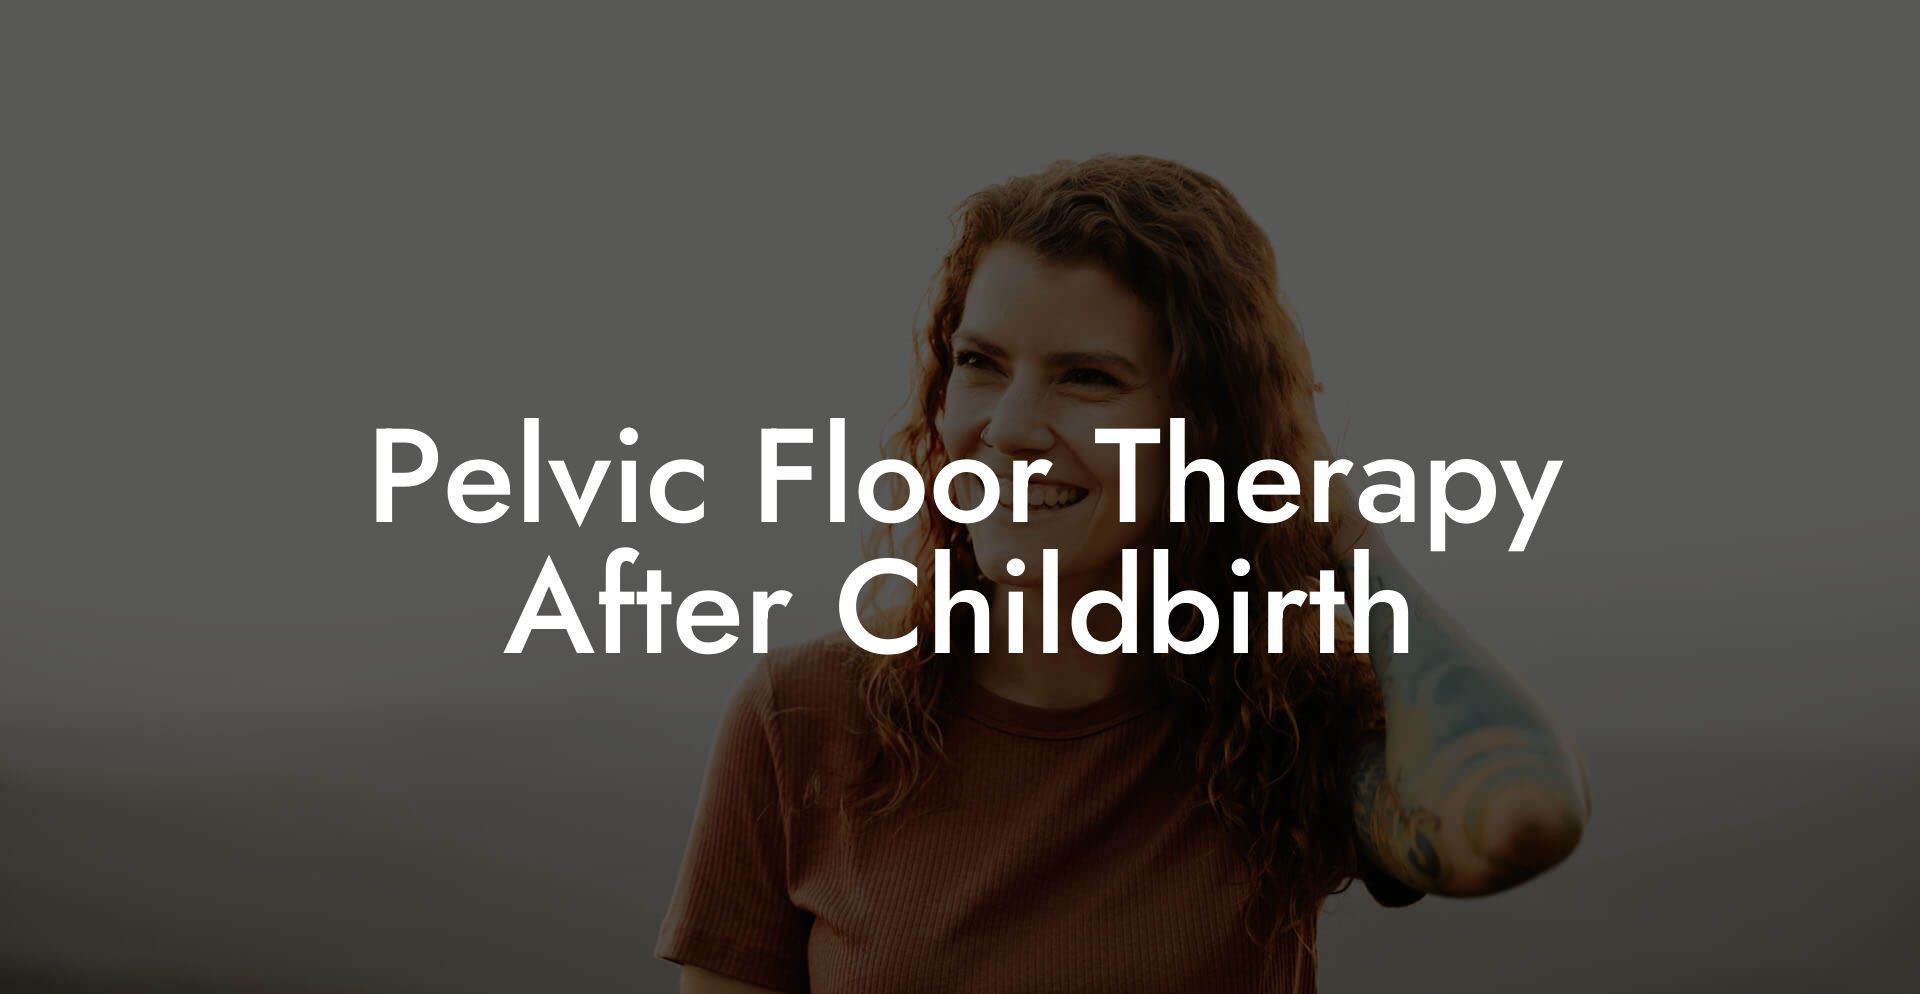 Pelvic Floor Therapy After Childbirth